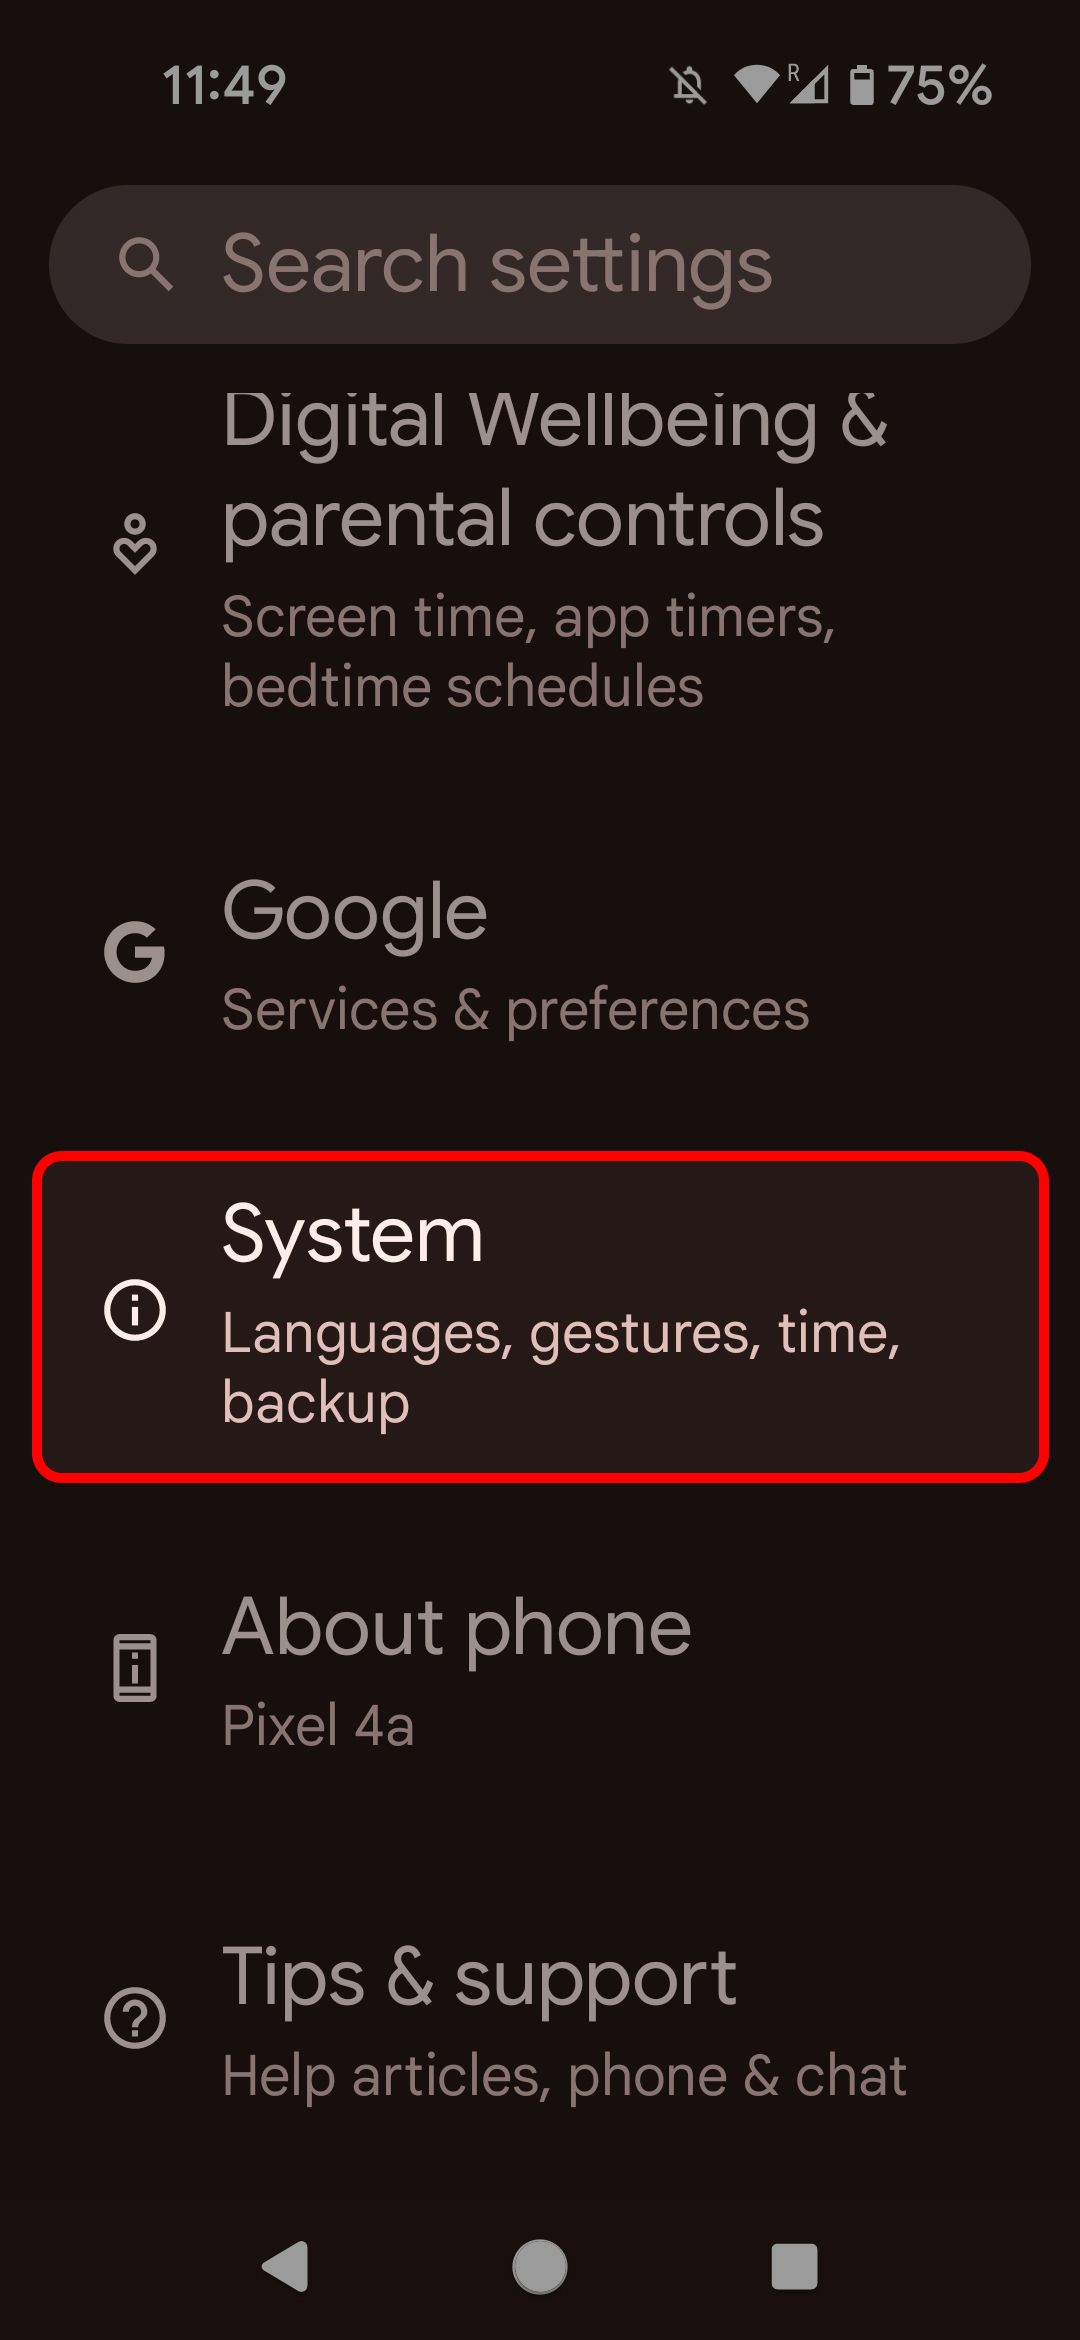 Android settings menu highlighting the System option